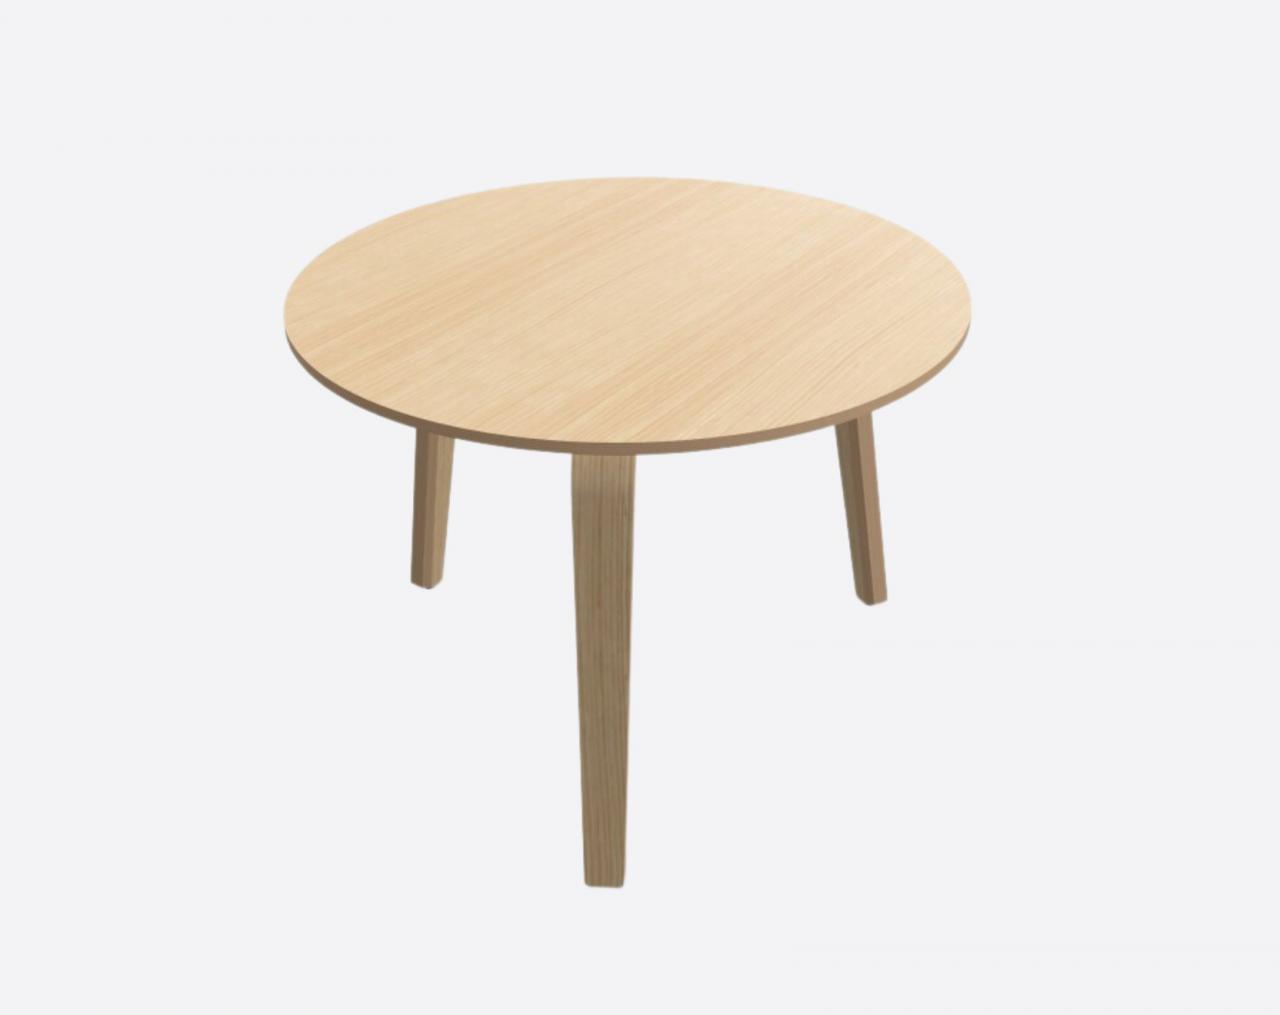 SUBMARINE Scandinavian oak coffee table - Stylish and practical table for your living room.